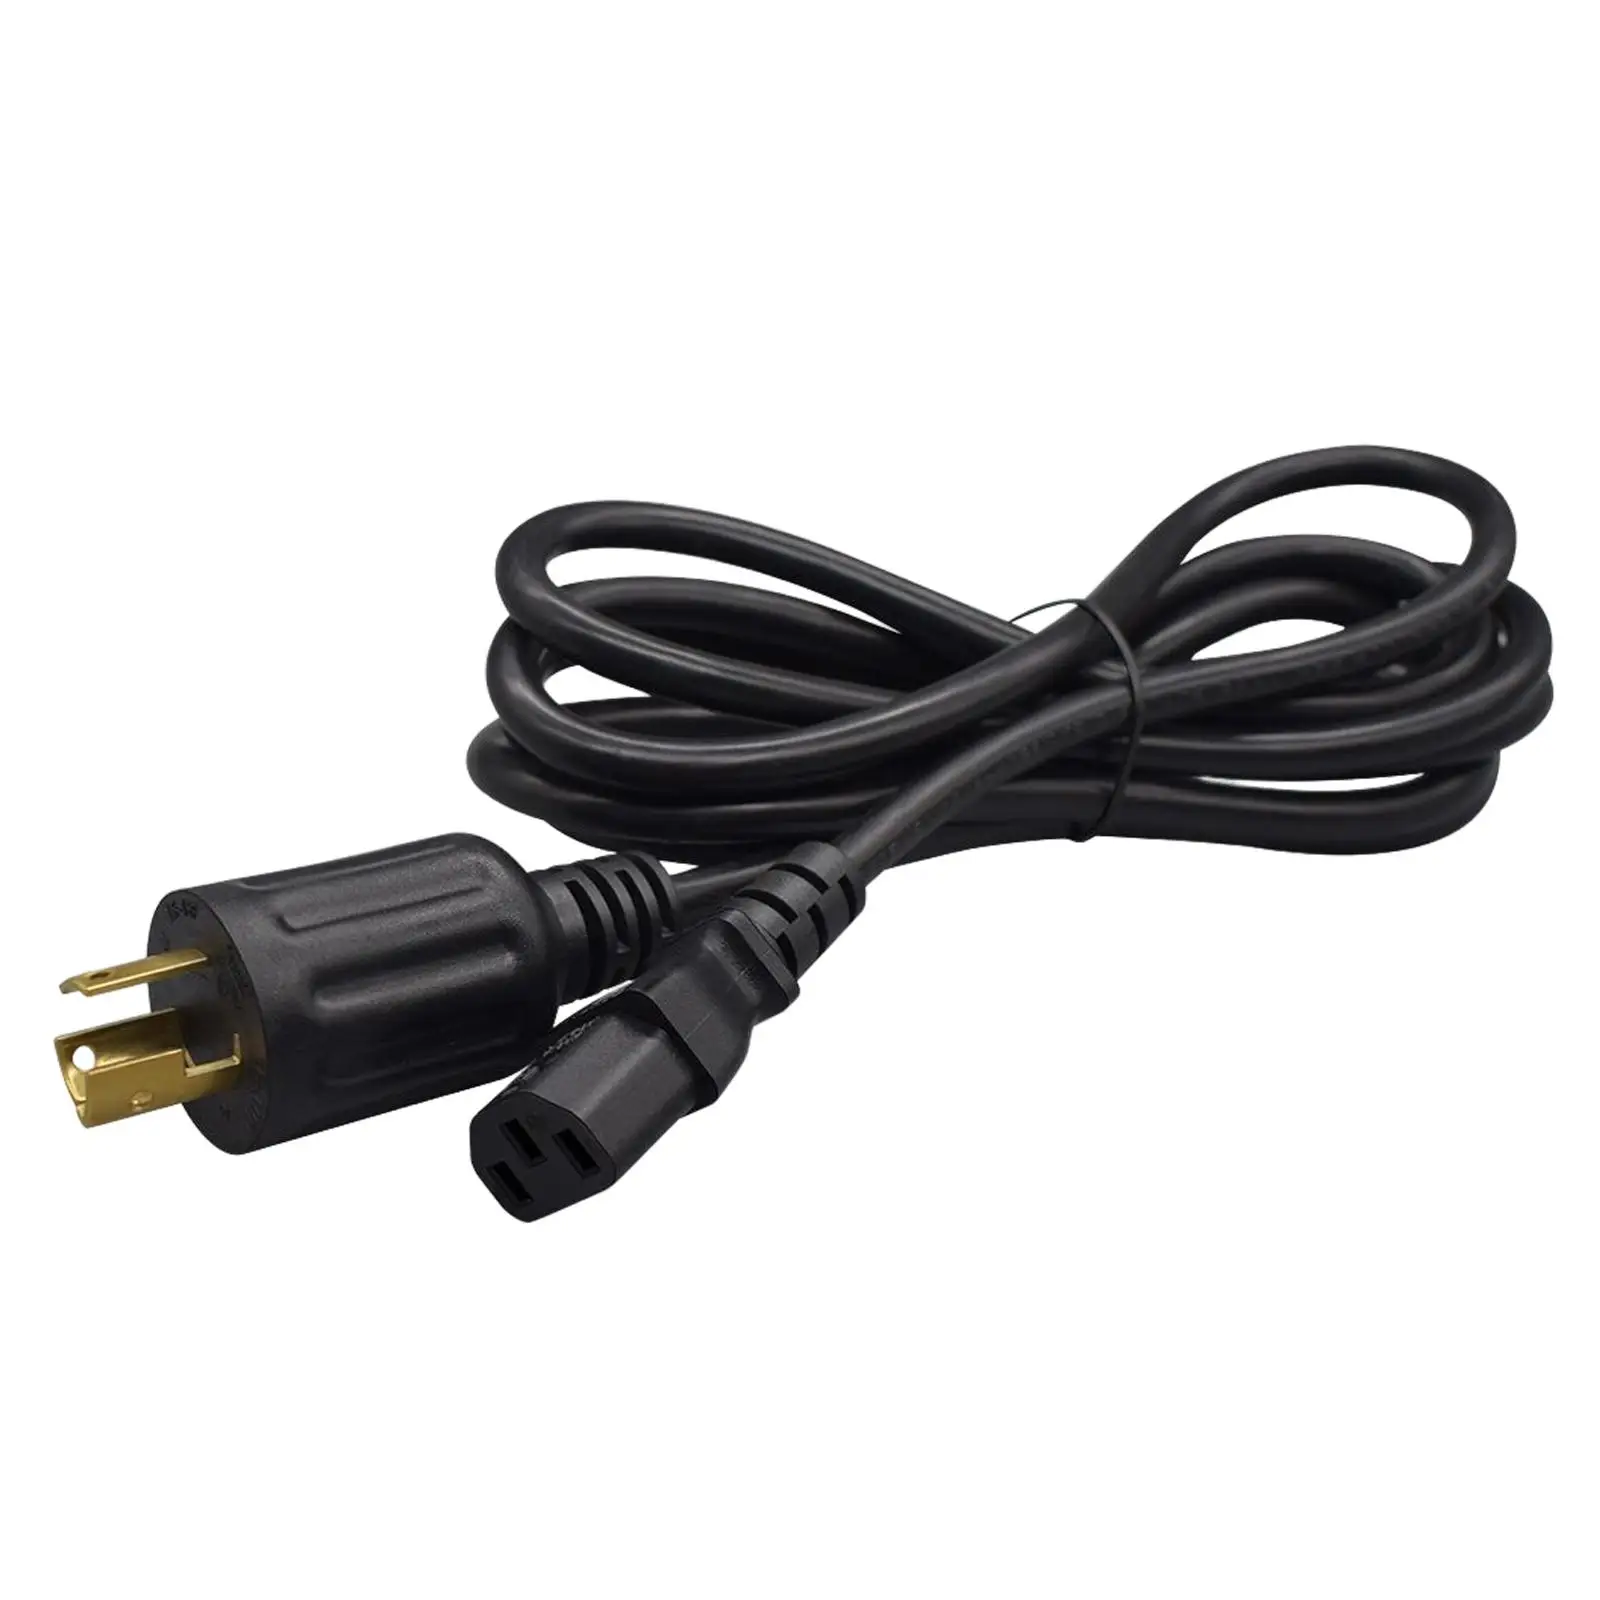 Power Cord L5-30P to IEC 320 C13 125V 15A Black 9.84 Feet Connector Accessories